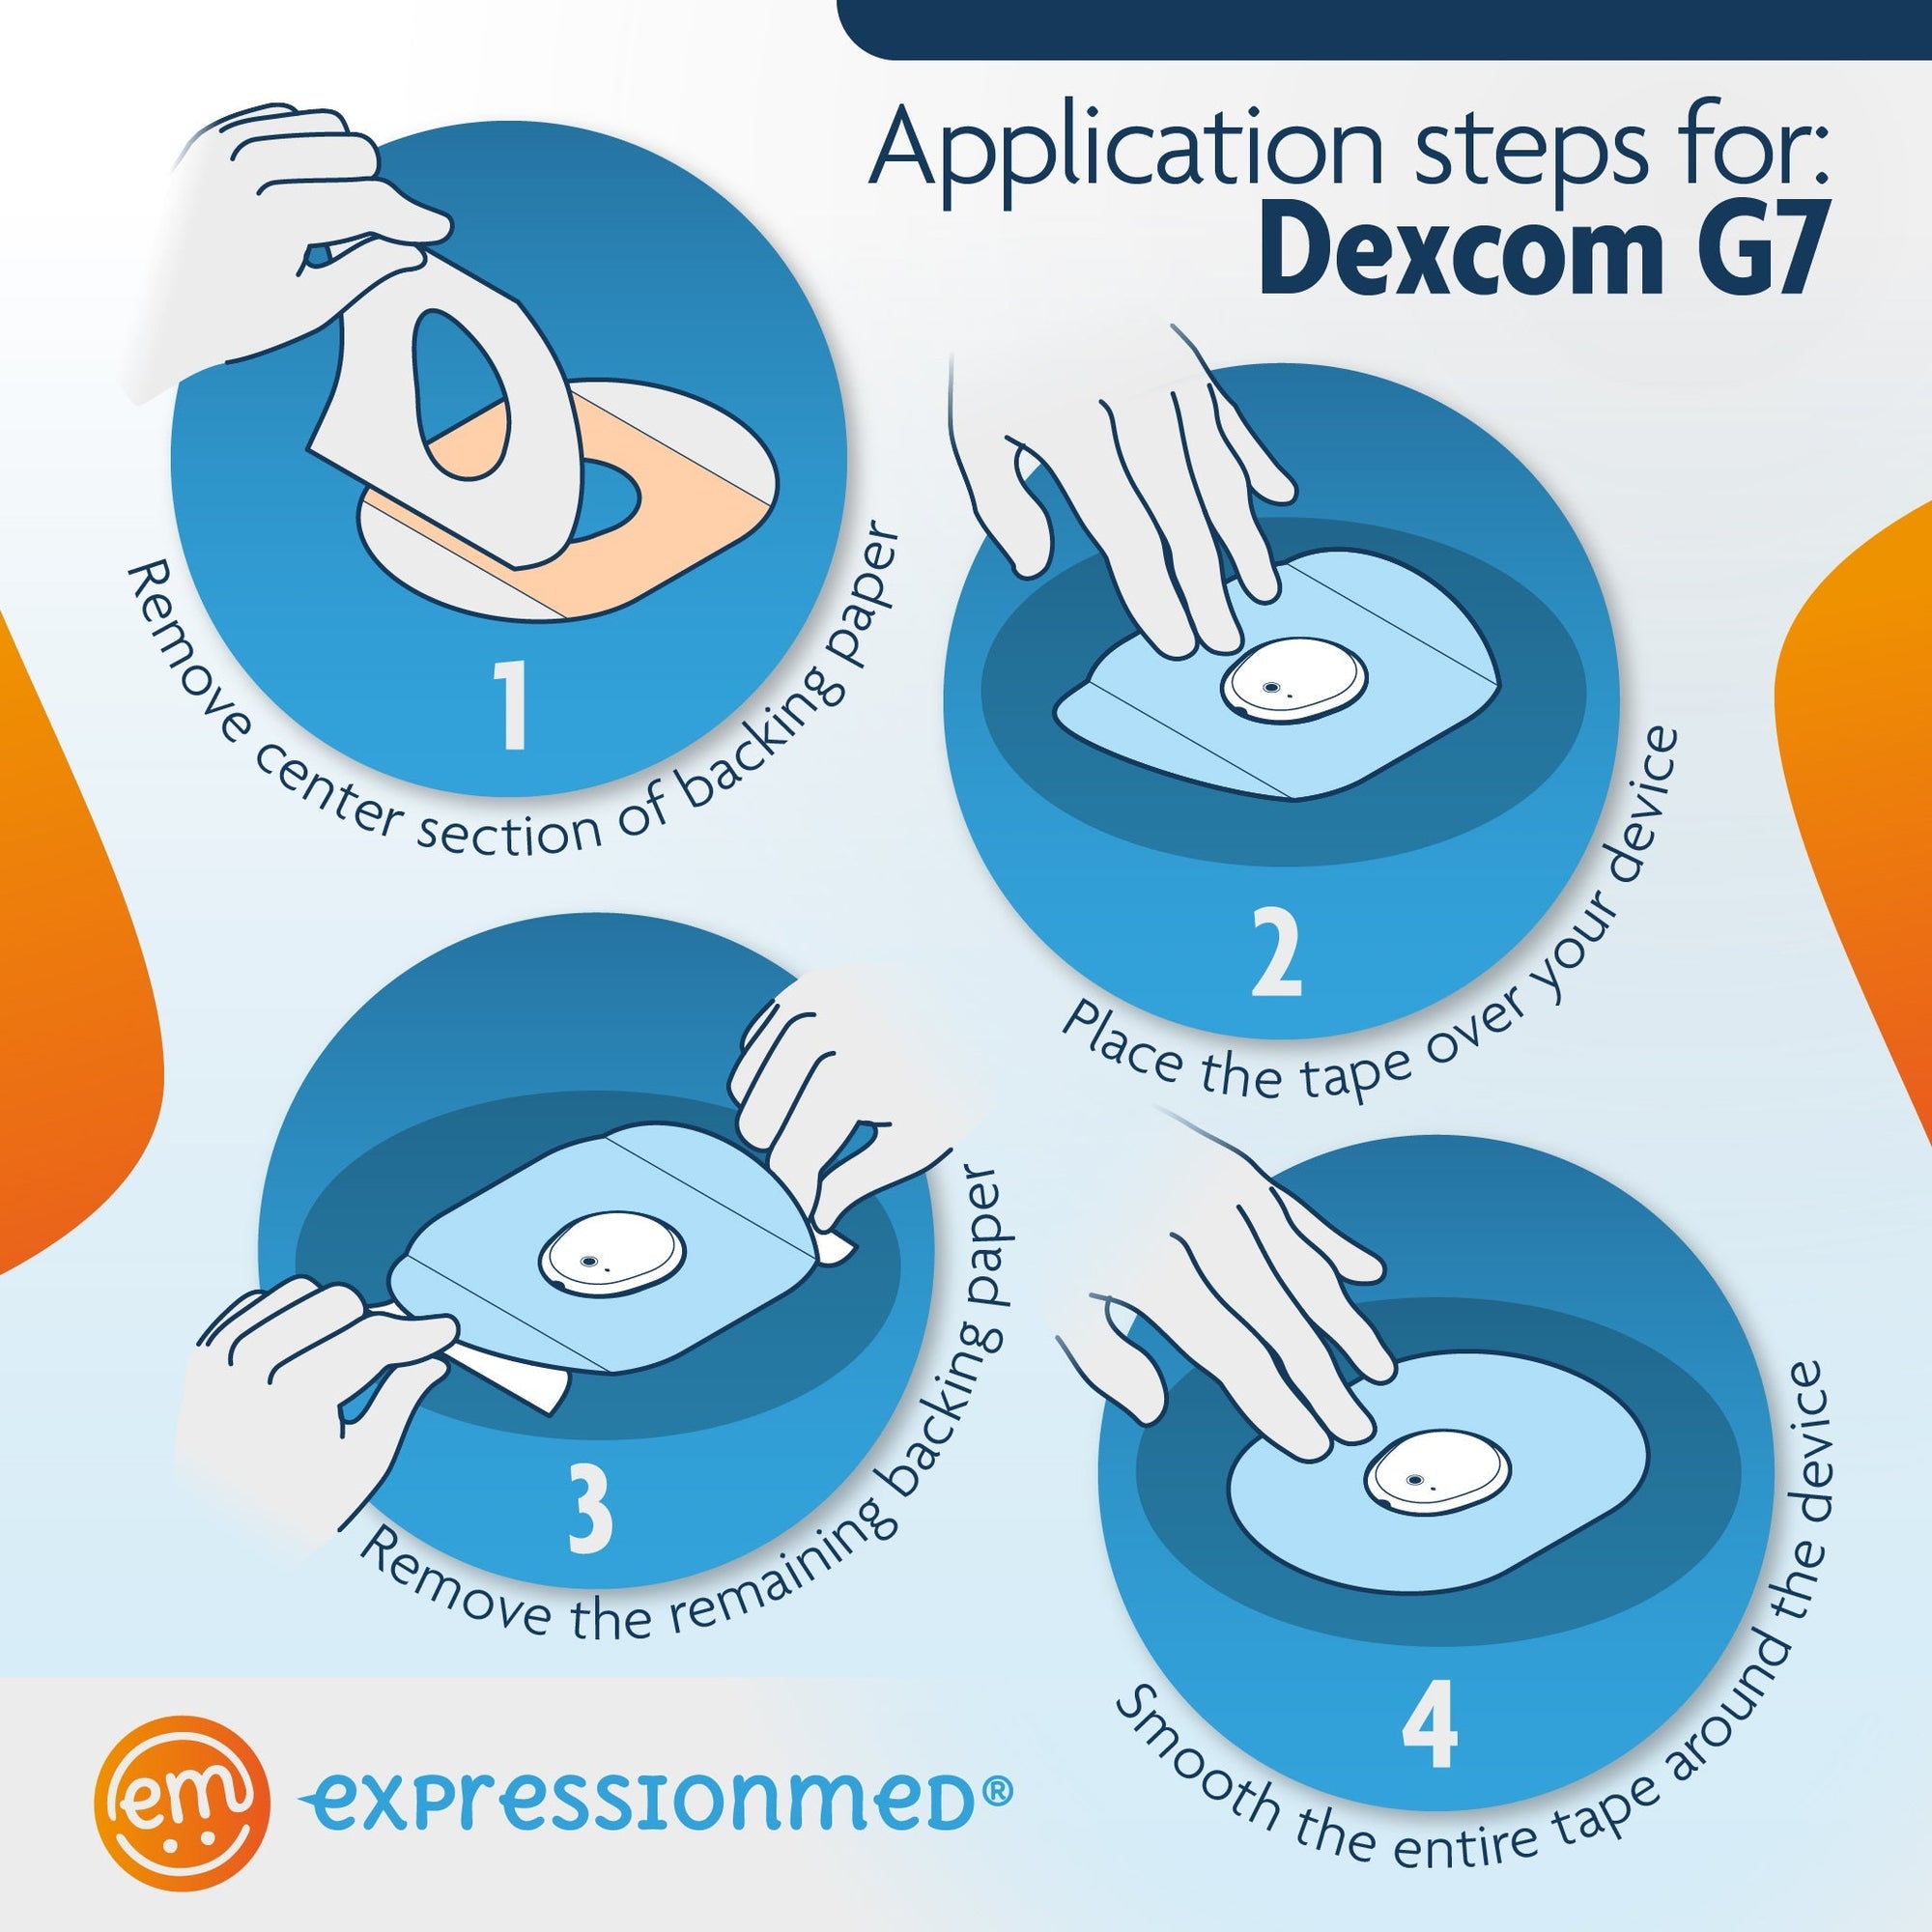 Application Instructions . 1. Prep skin with soap and water. 2. Remove Middle Section and lay center hole over device. 3. Peel off both end sections and smooth down on skin. To remove, hold an edge and strech material off skin., Dexcom Stelo Glucose Biosensor System